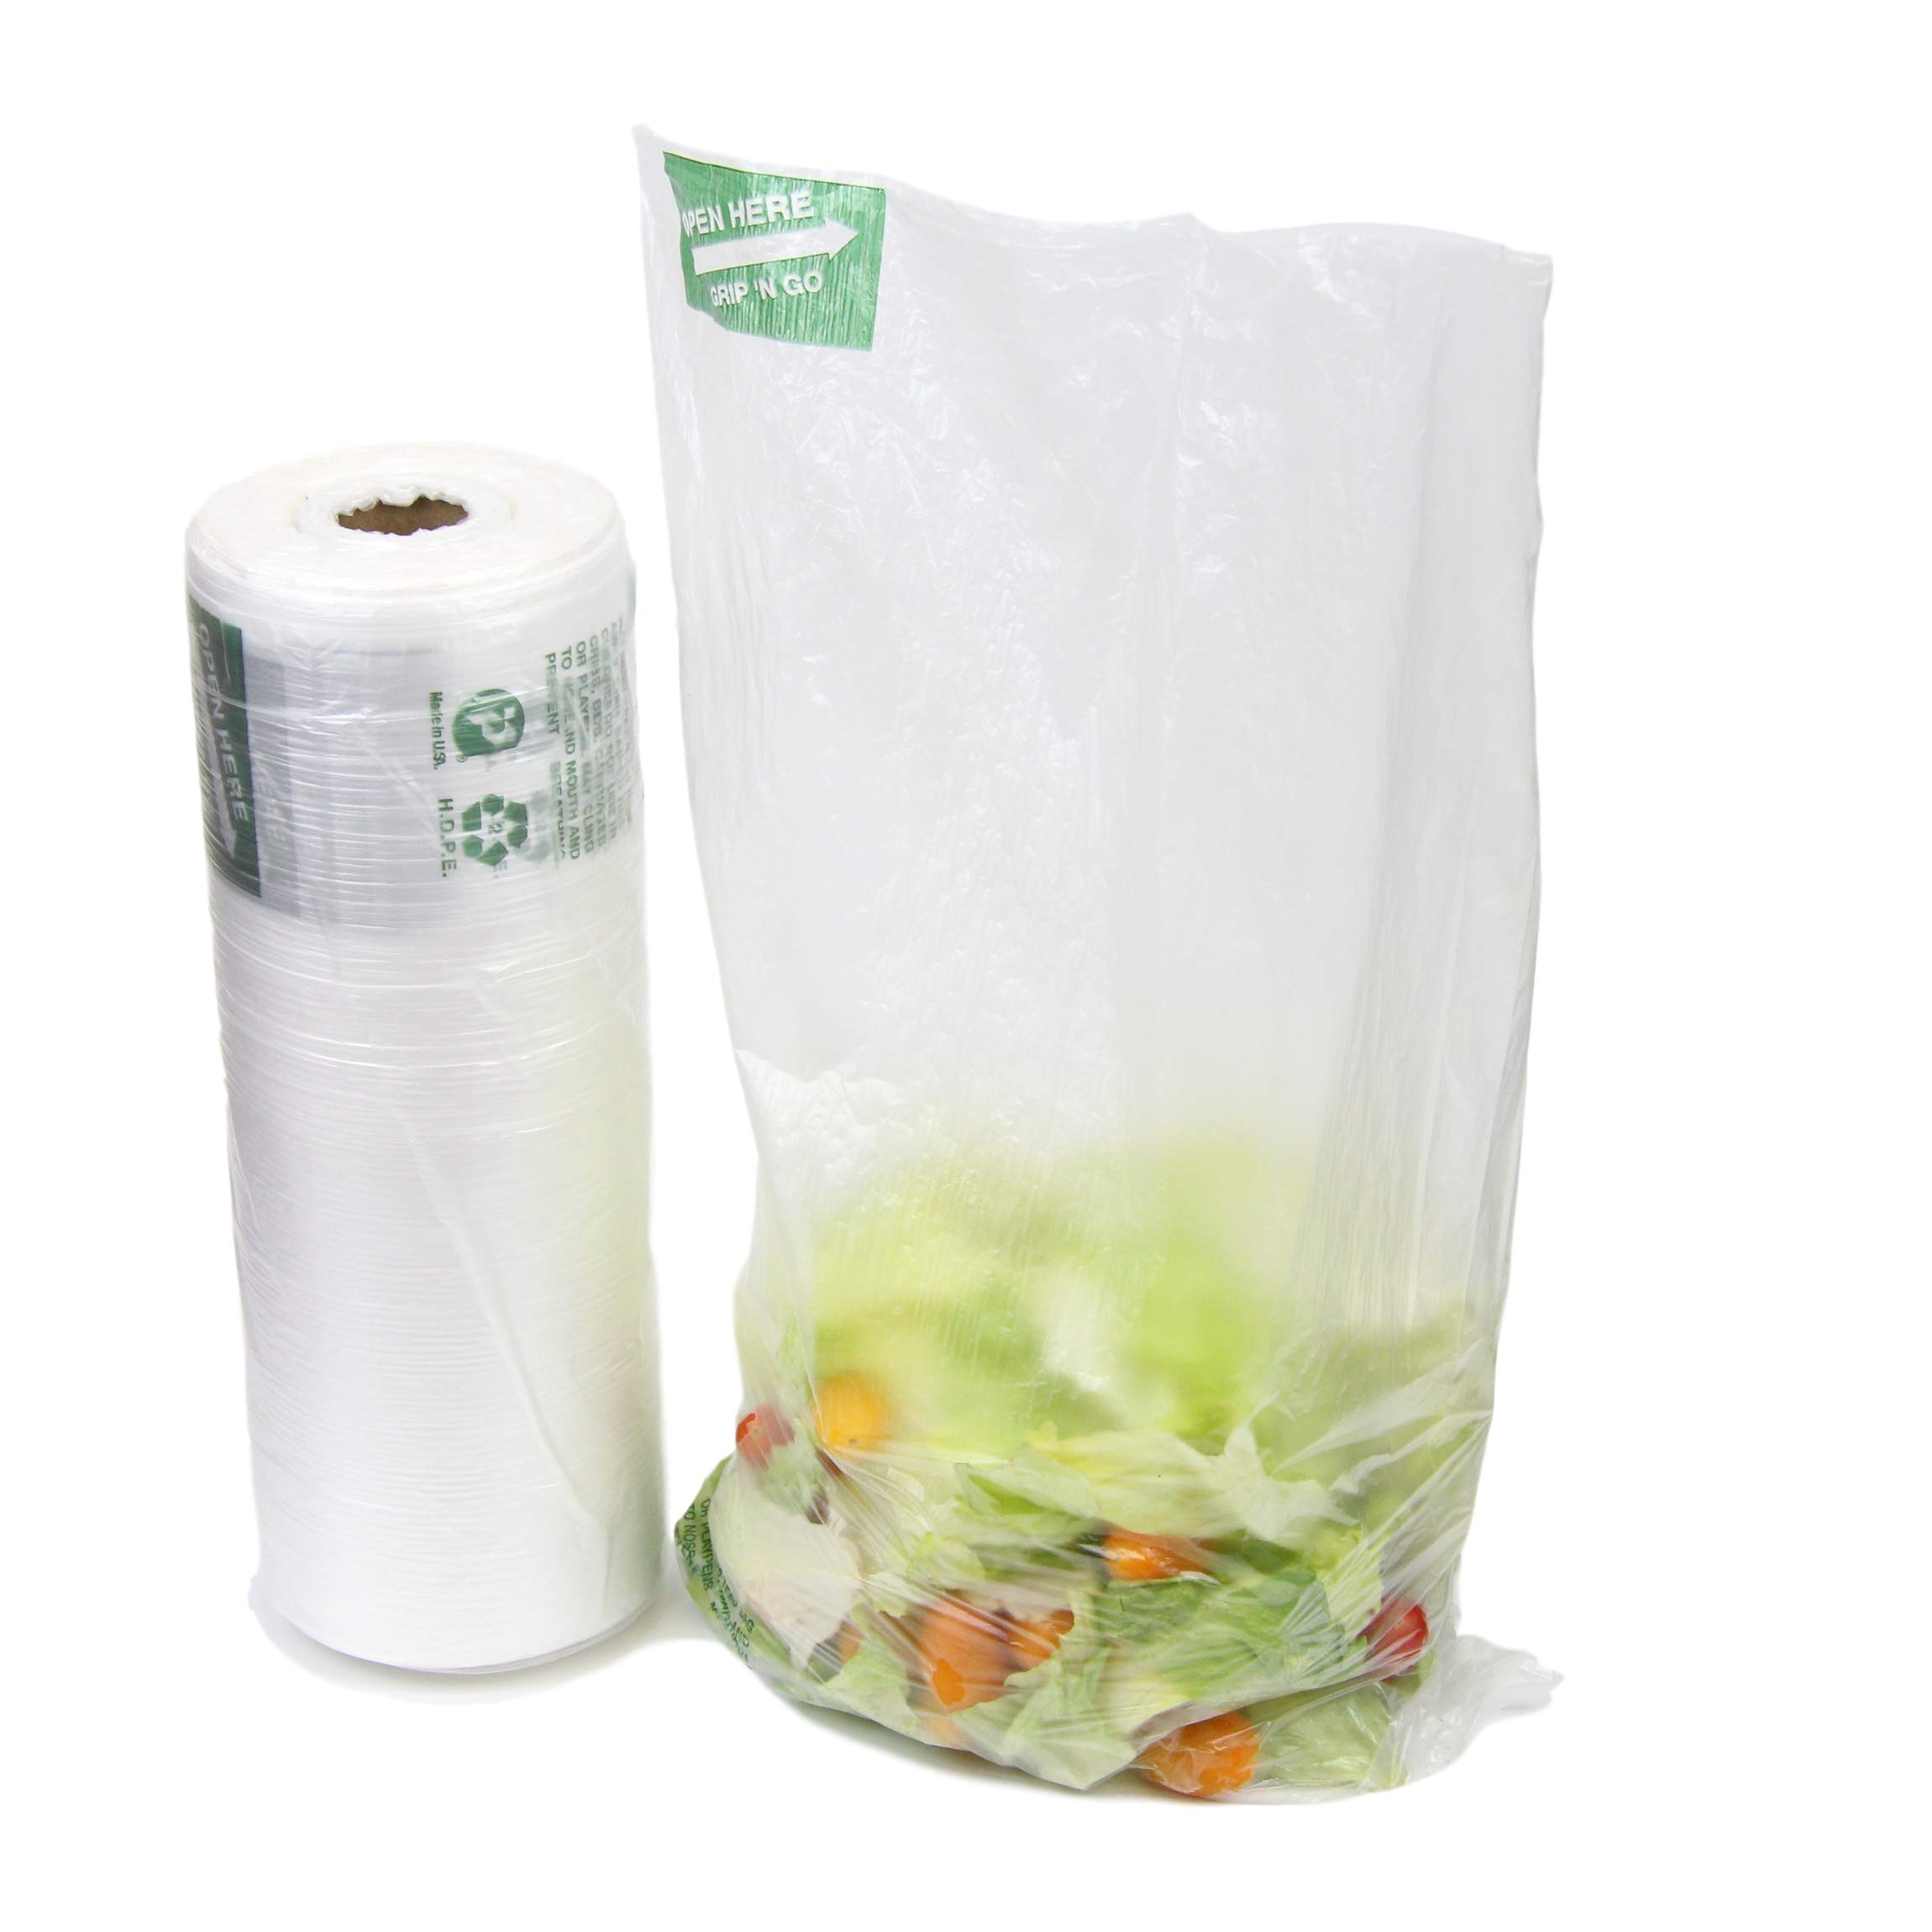 Mua 650 Ct 12"x 20" Large Plastic Produce Bag Roll, US Made HDPE, Durable Clear Food Storage Saver for Fruit Vegetable Bakery Snack Grocery Bags trên Amazon Mỹ chính hãng 2023 | Fado